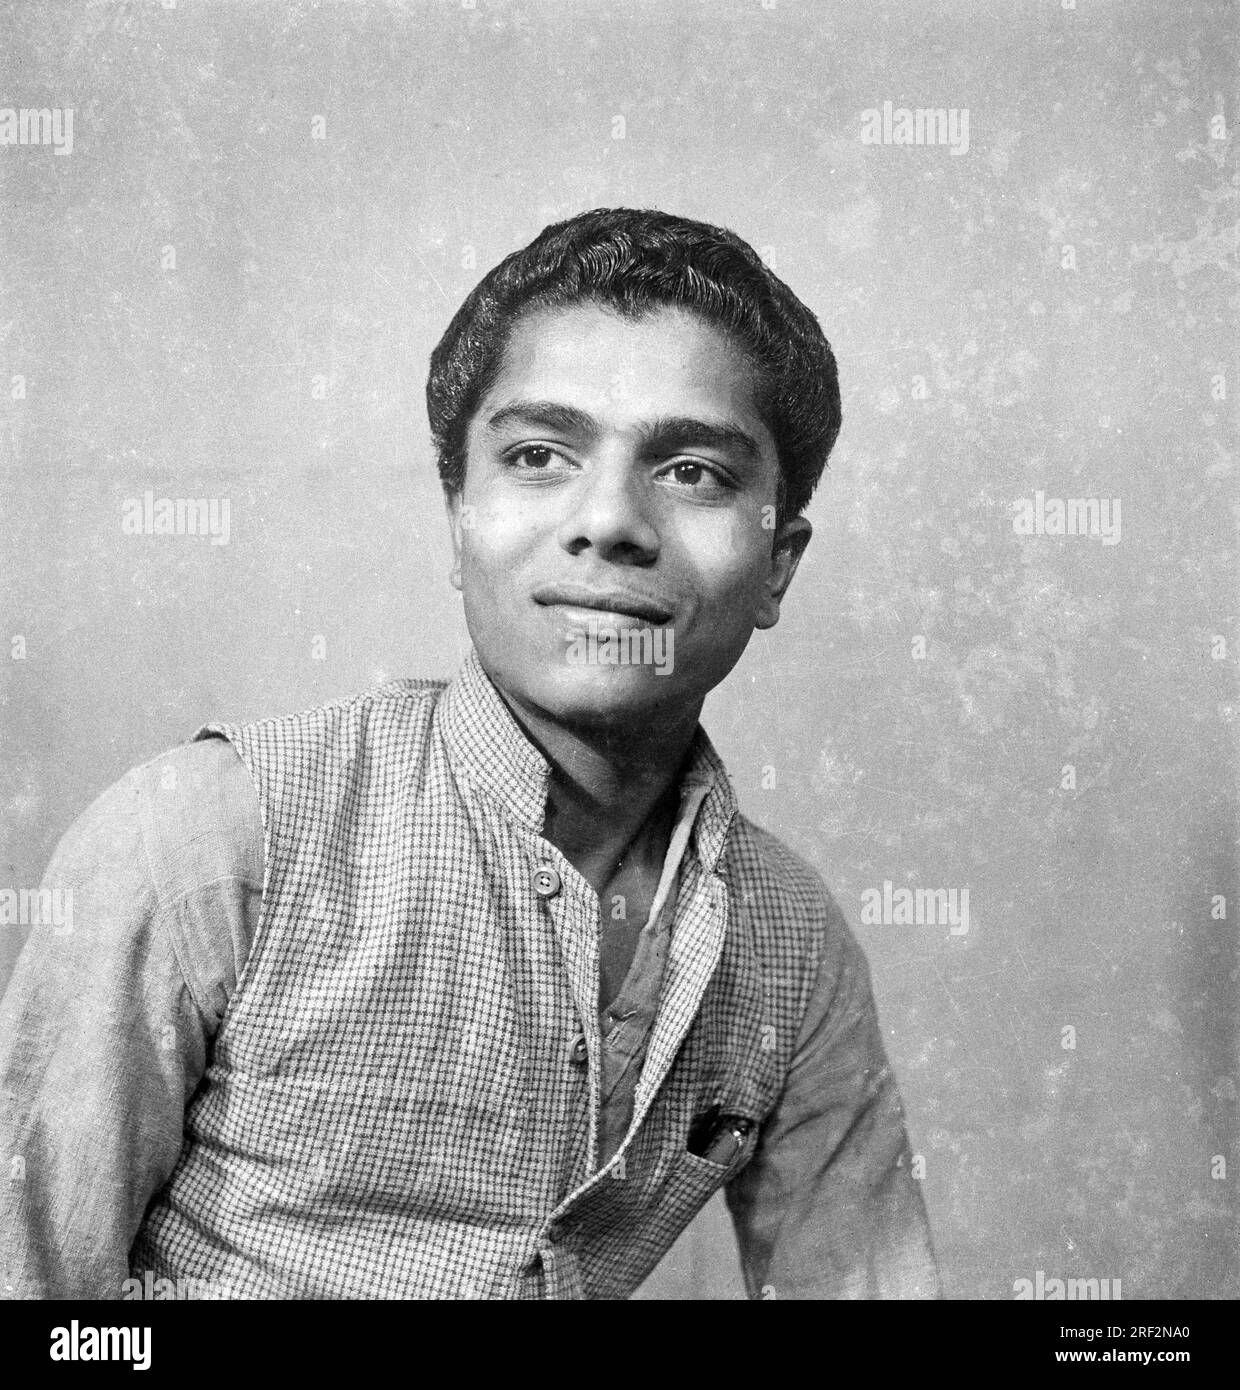 old vintage black and white 1900s picture of Indian man studio portrait wearing jacket India 1940s Stock Photo